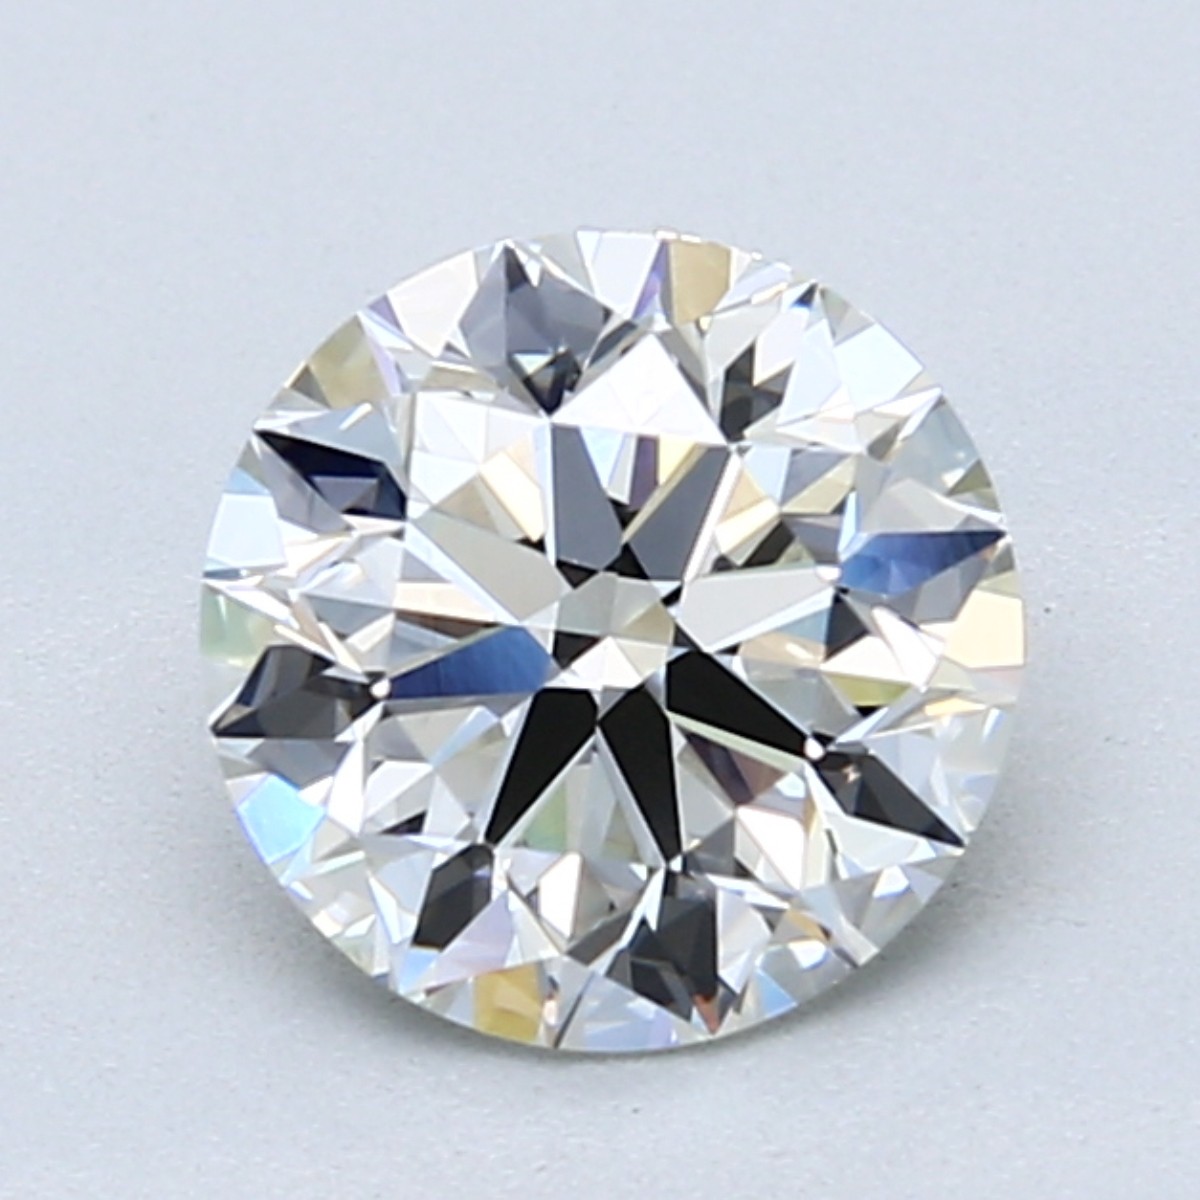 Round 1.6 Carat I Color VVS2 Clarity For Sale